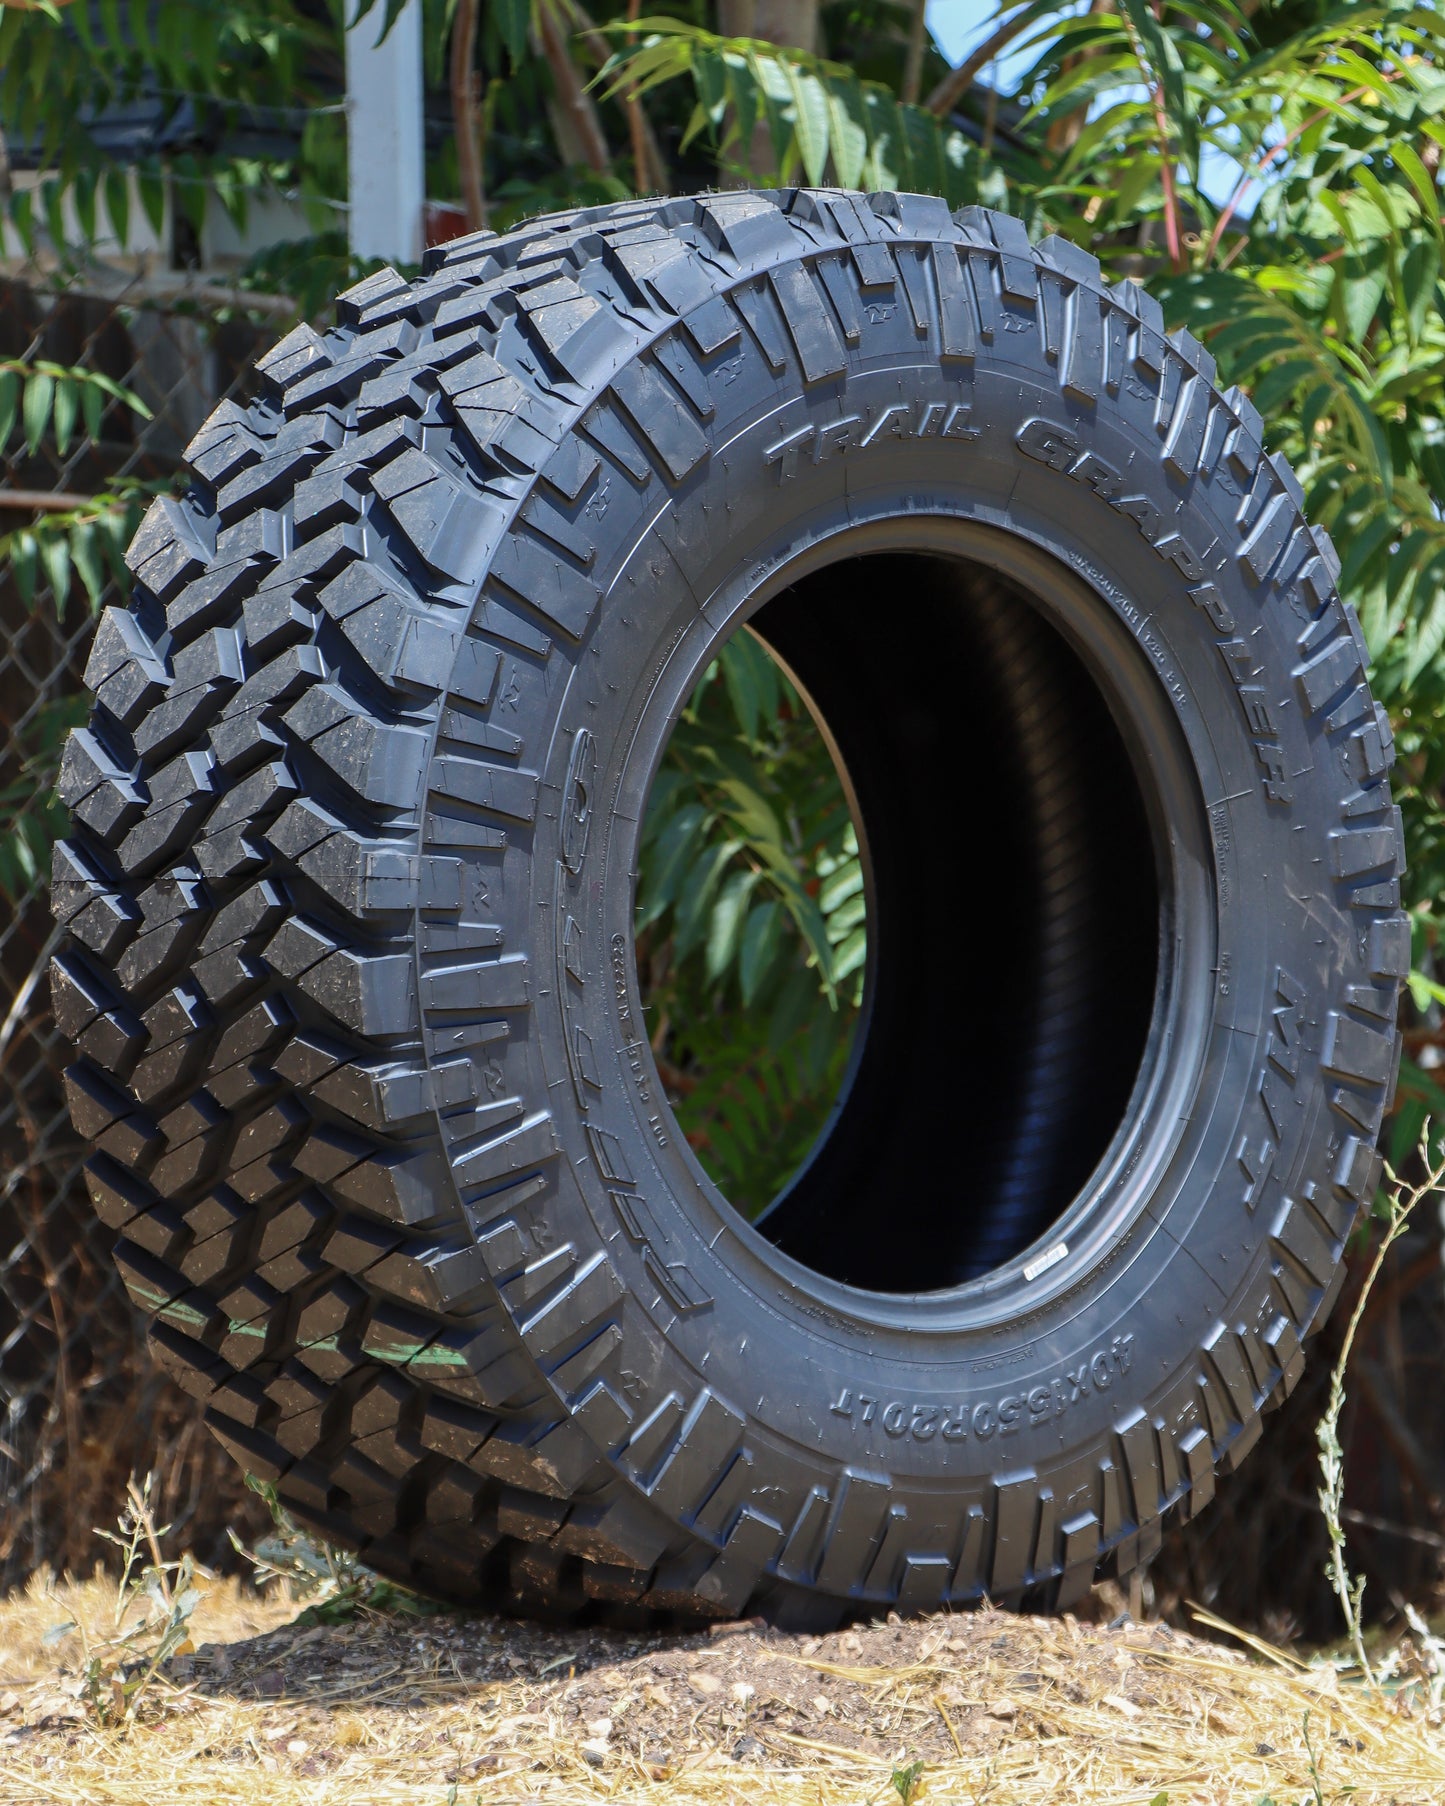 Nitto Trail Grappler sitting on the ground in the dirt with trees in the background.